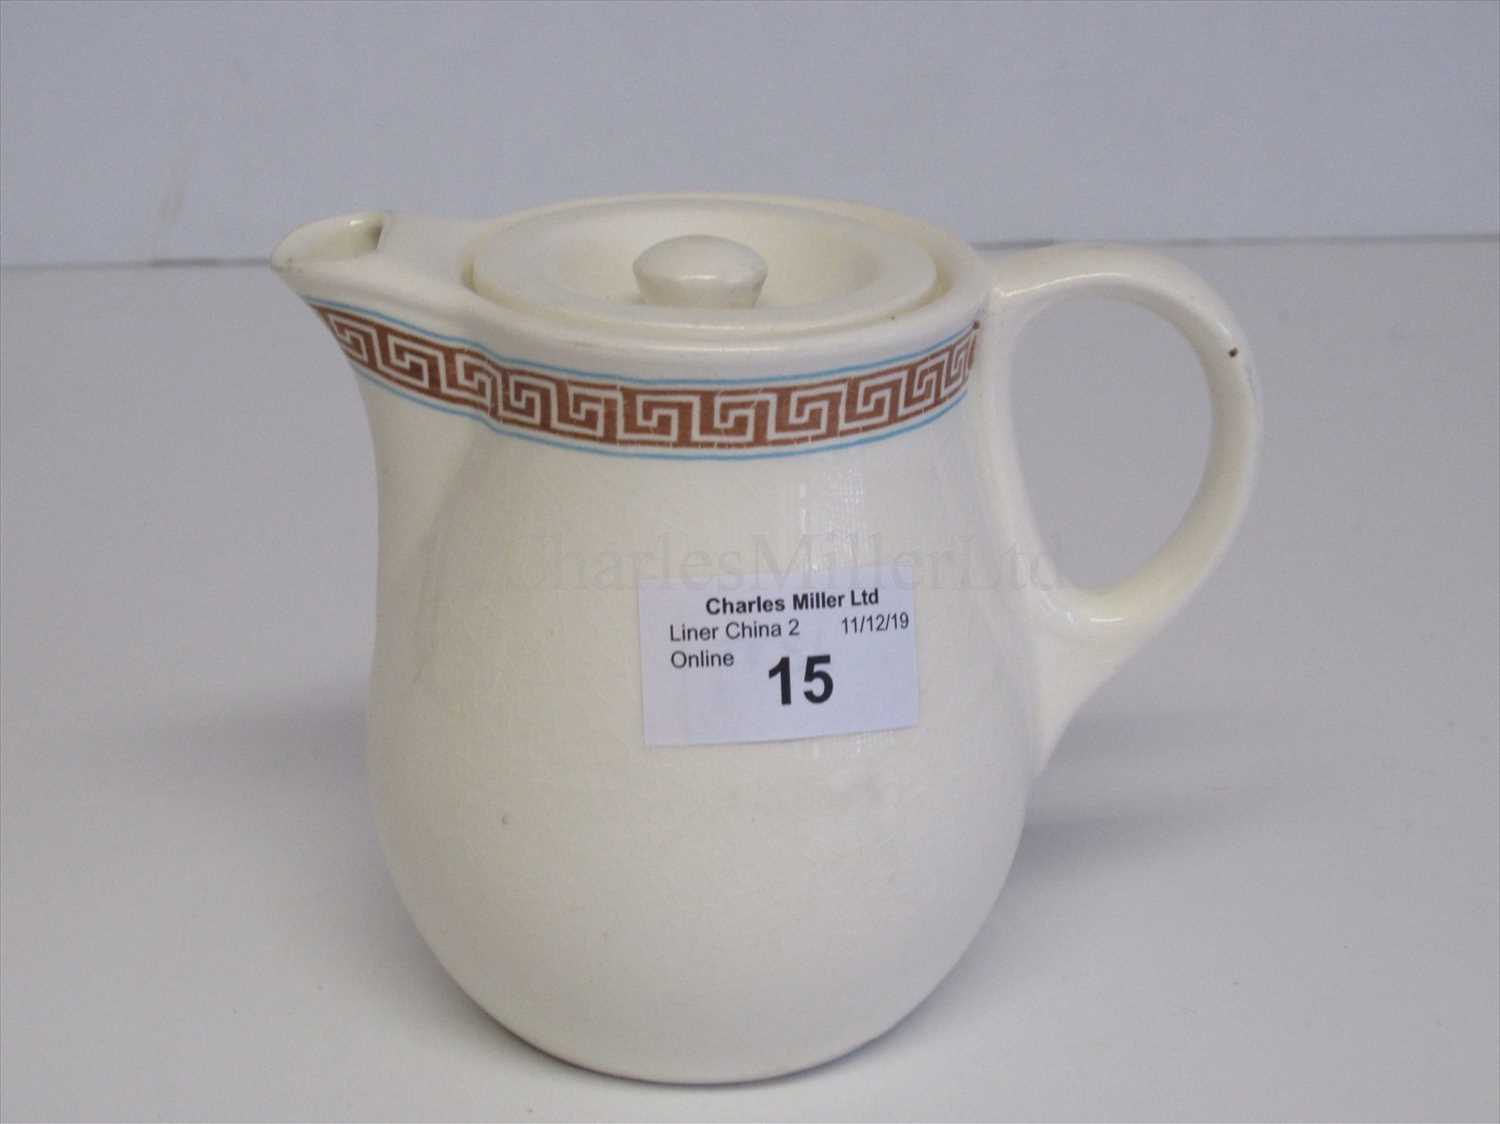 Lot 15 - British & Commonwealth Line: A hot water jug